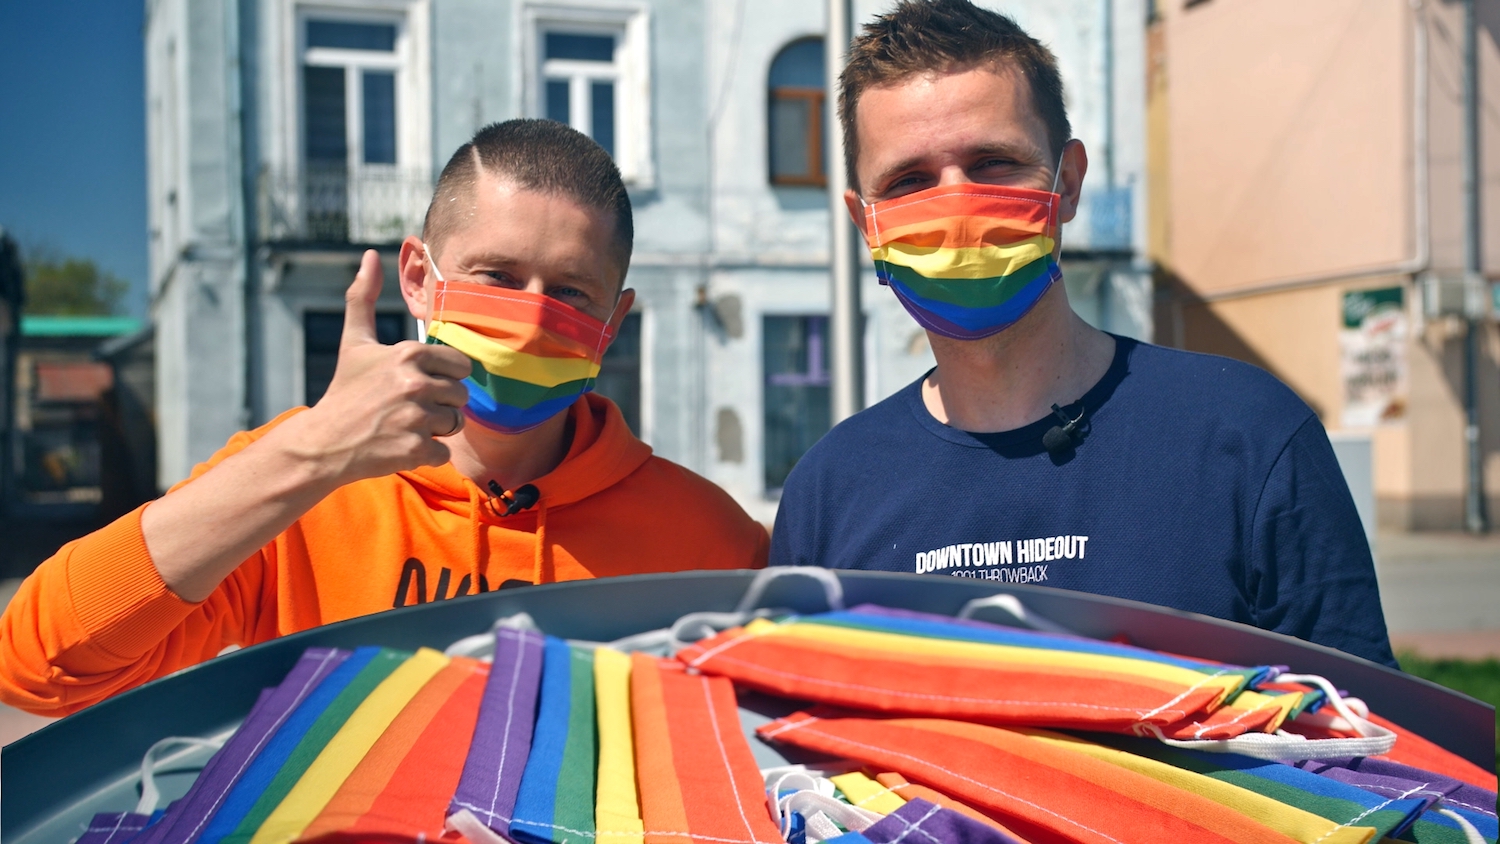 Husbands give out rainbow masks in Poland’s notorious “LGBT Free Zones”